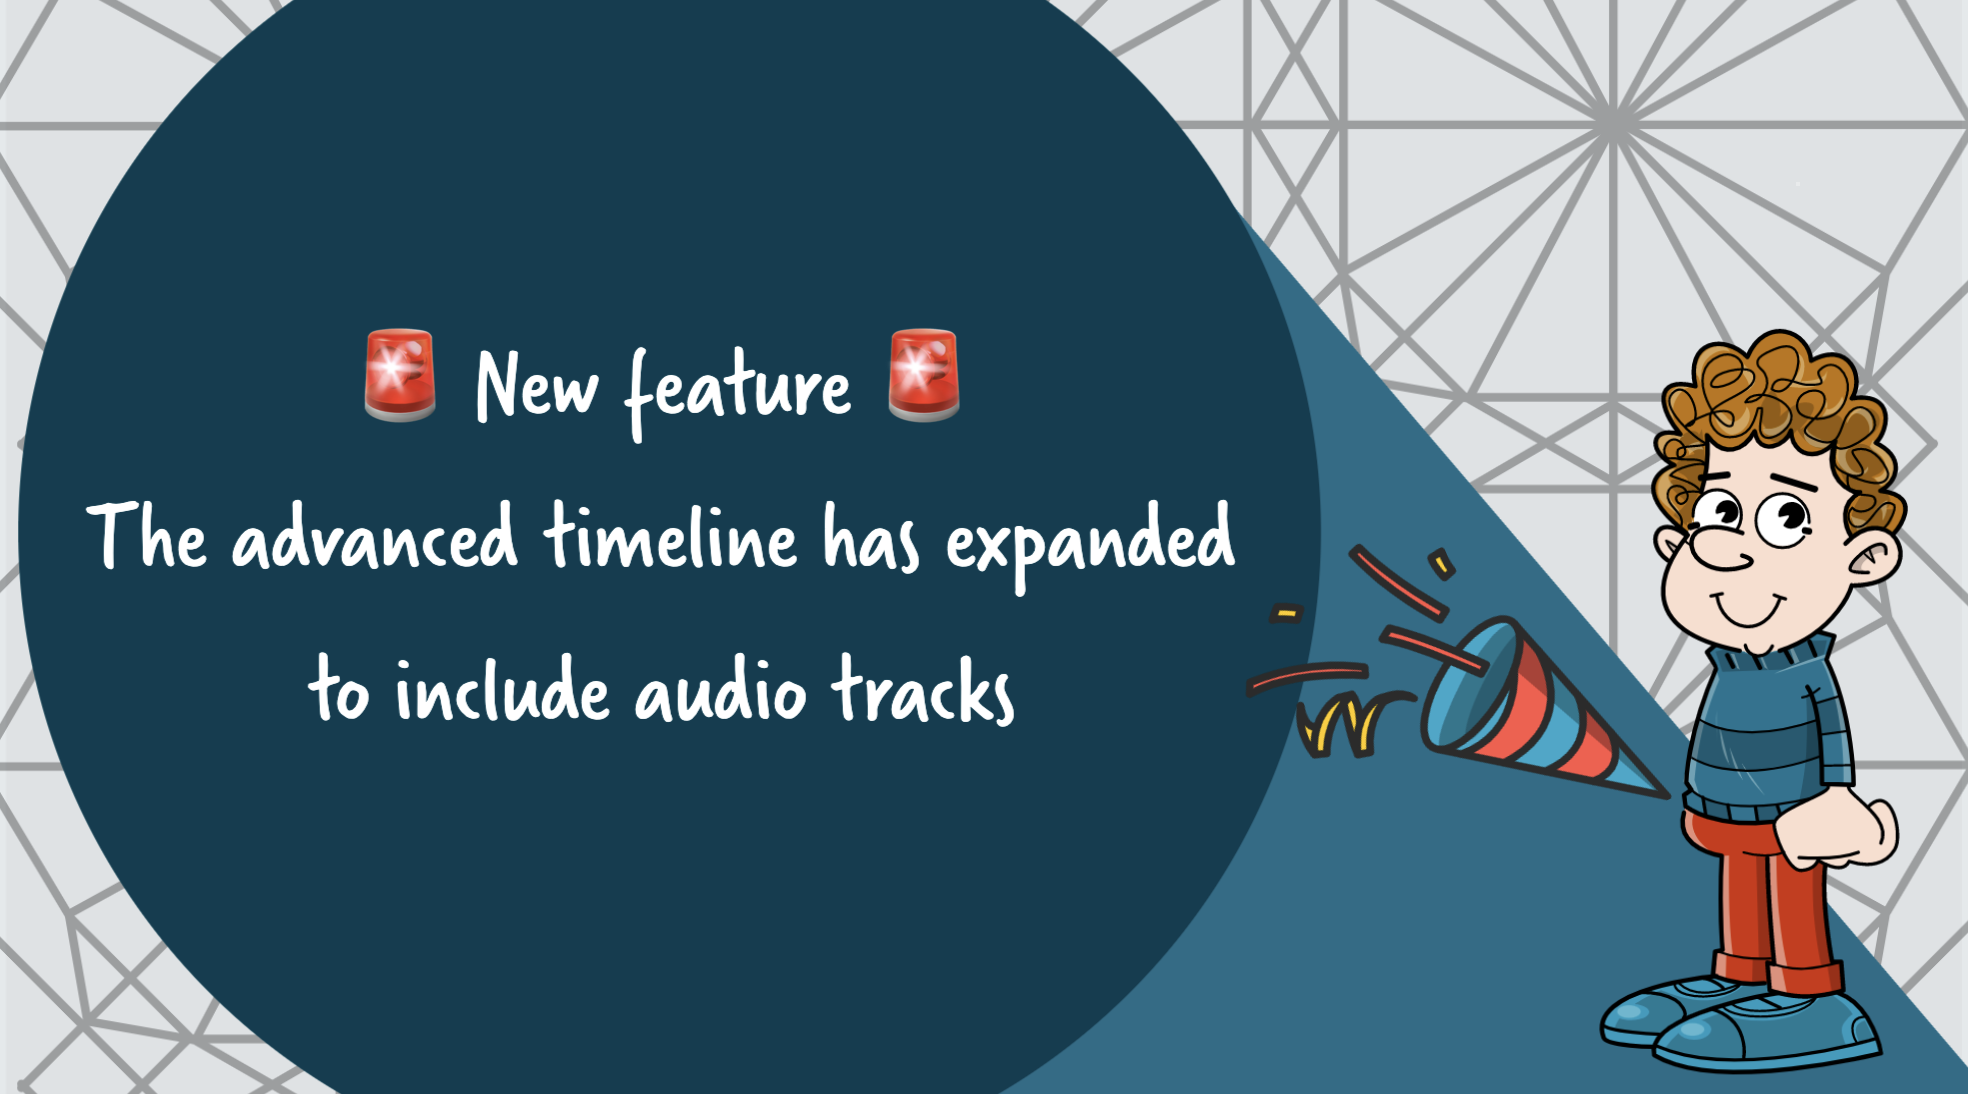 🚨 New feature 🚨 The advanced timeline has expanded to include audio tracks